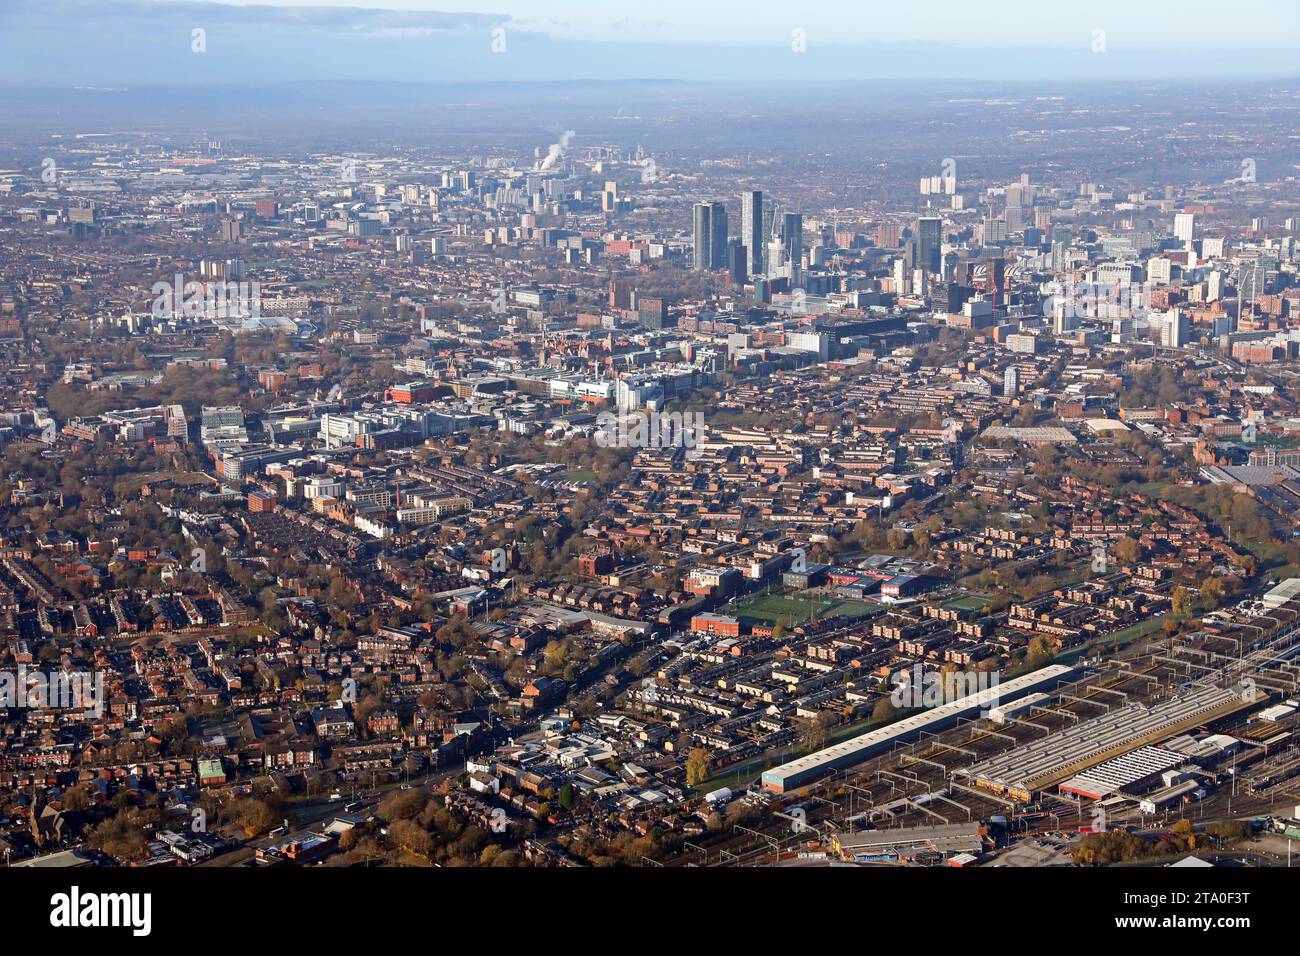 aerial view of the Manchester city centre skyline viewed from the Ardwick & Longsight areas of the city Stock Photo